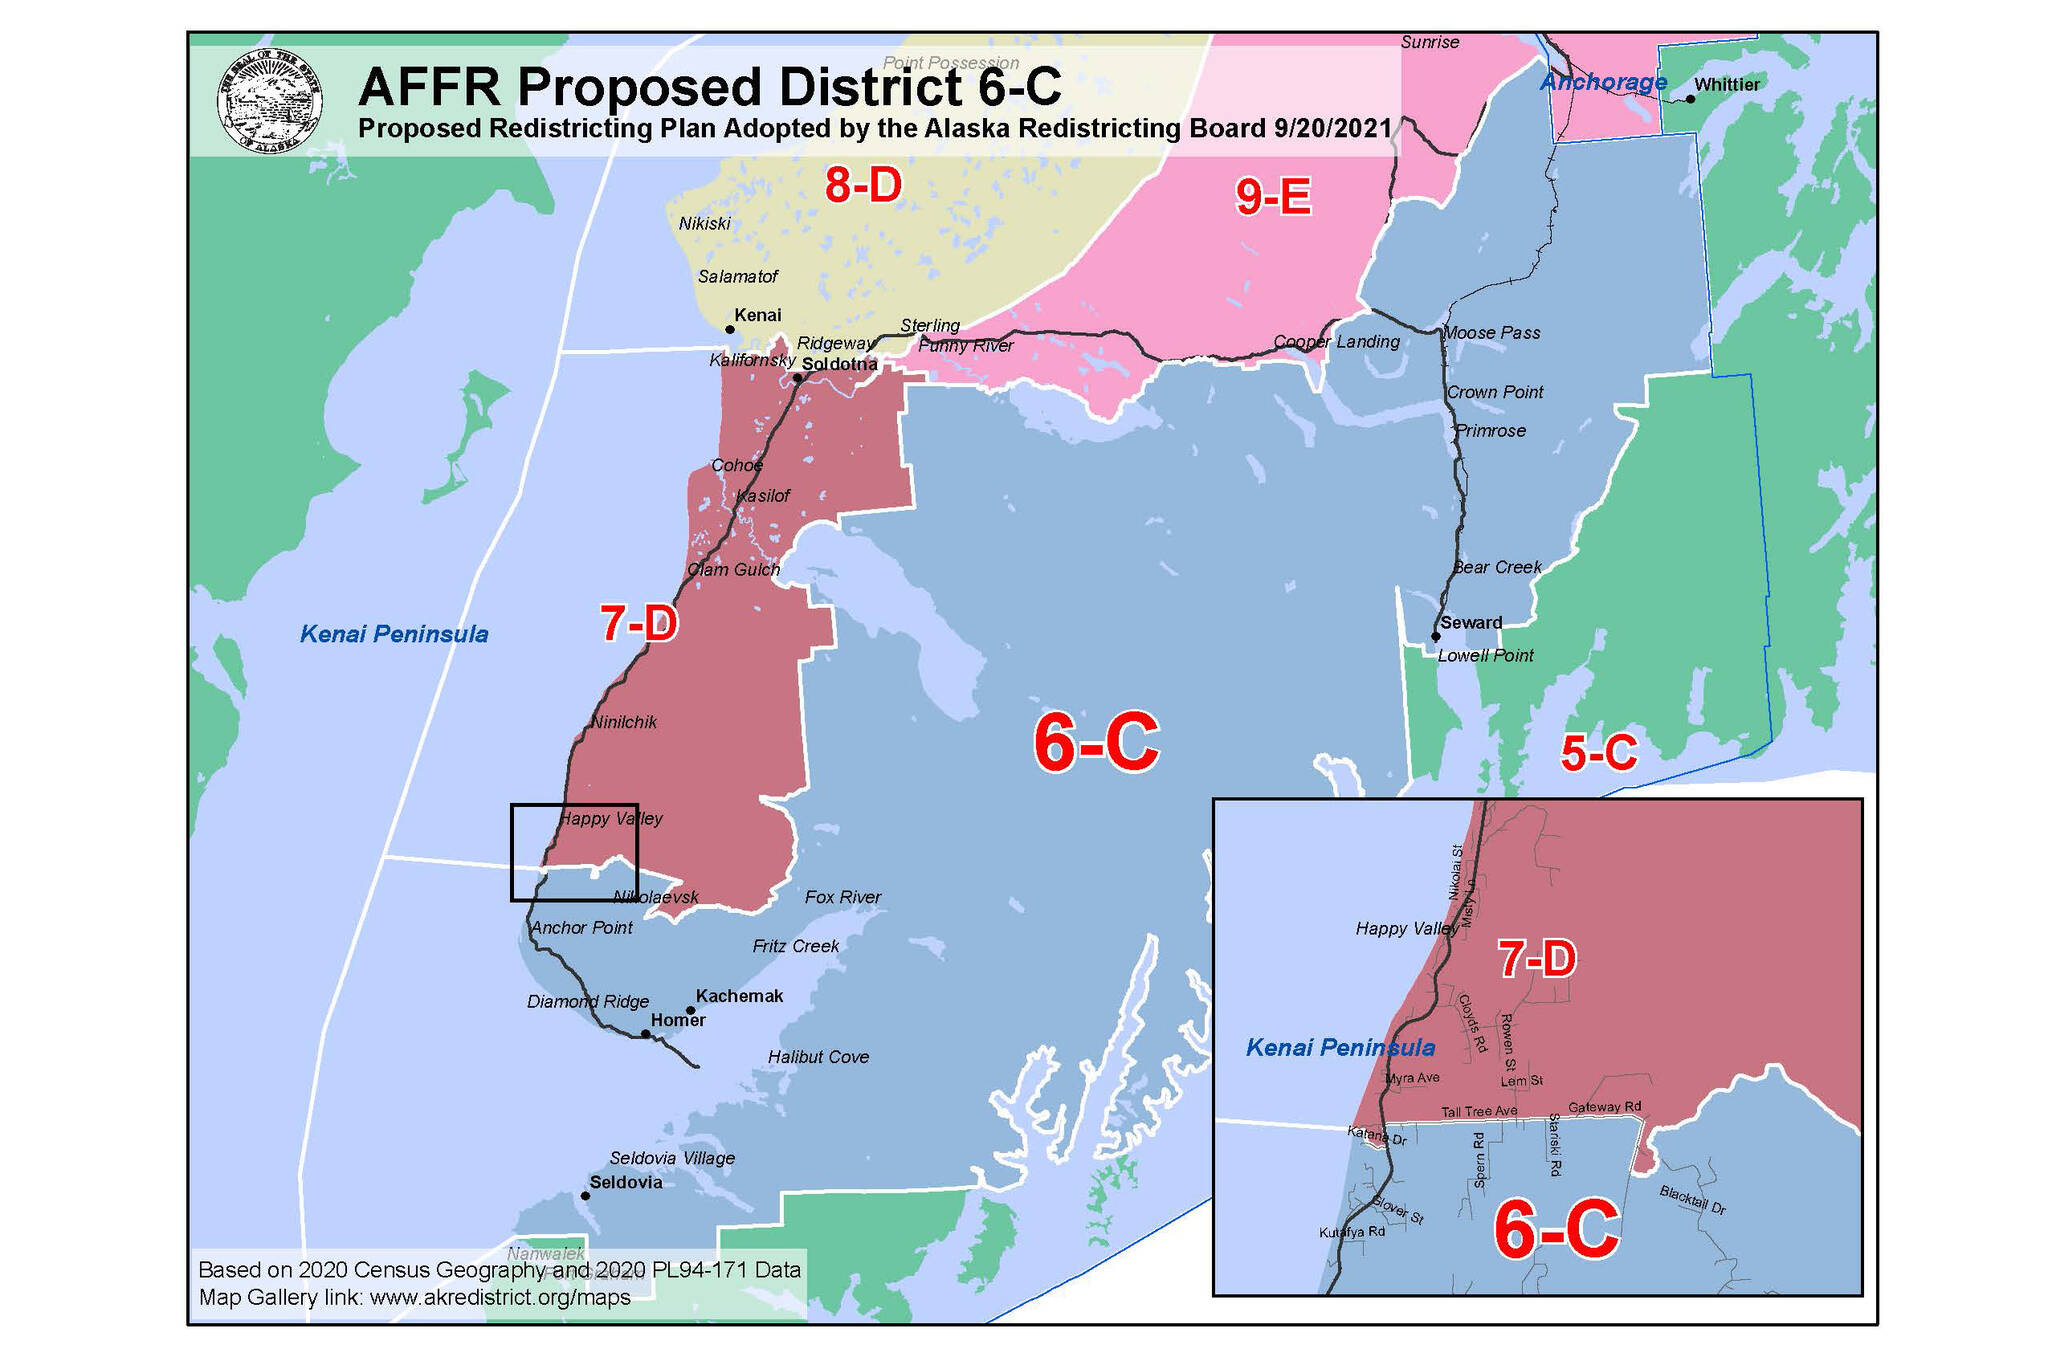 Alaskans for Fair Redistricting proposes a House District 6-C centered around the southern and eastern Kenai Peninsula that includes Homer, Anchor Point, Seldoiva and Seward in one district. It also puts the Russian Old Believer communities of Nikolaevsk, Razdolna, Voznesenka and Kachemak Selo in the same district. (Map courtesy of Alaskans for Fair Redistricting)